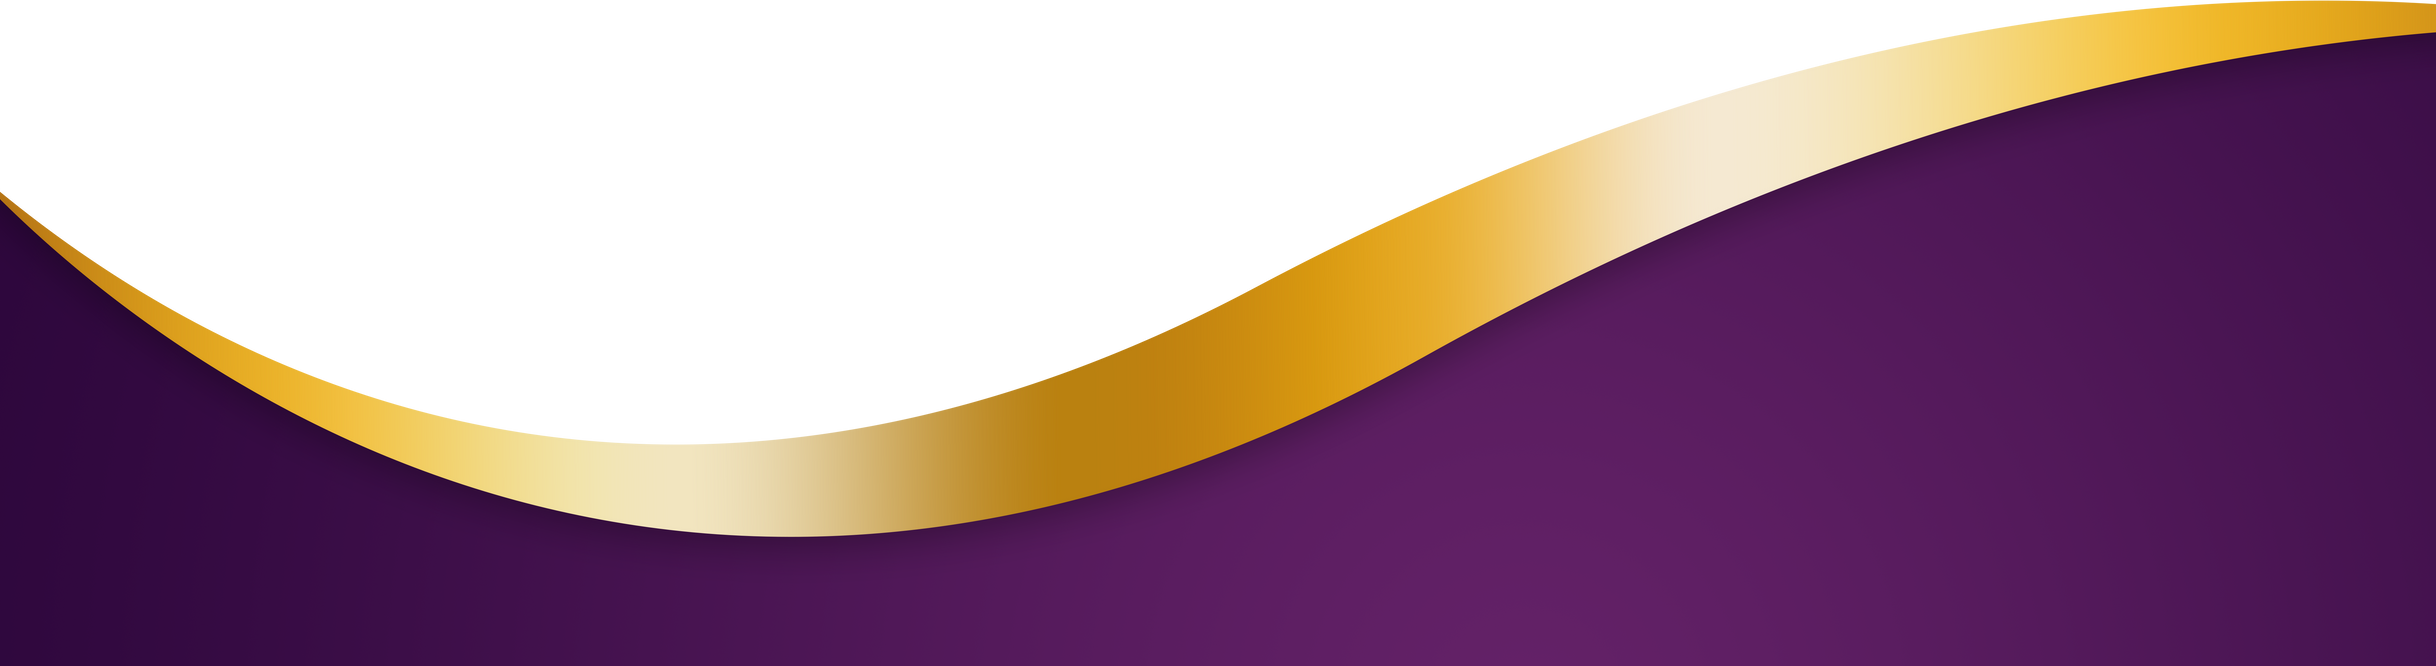 Purple and Gold Wavy Banner. Curved header and footer.